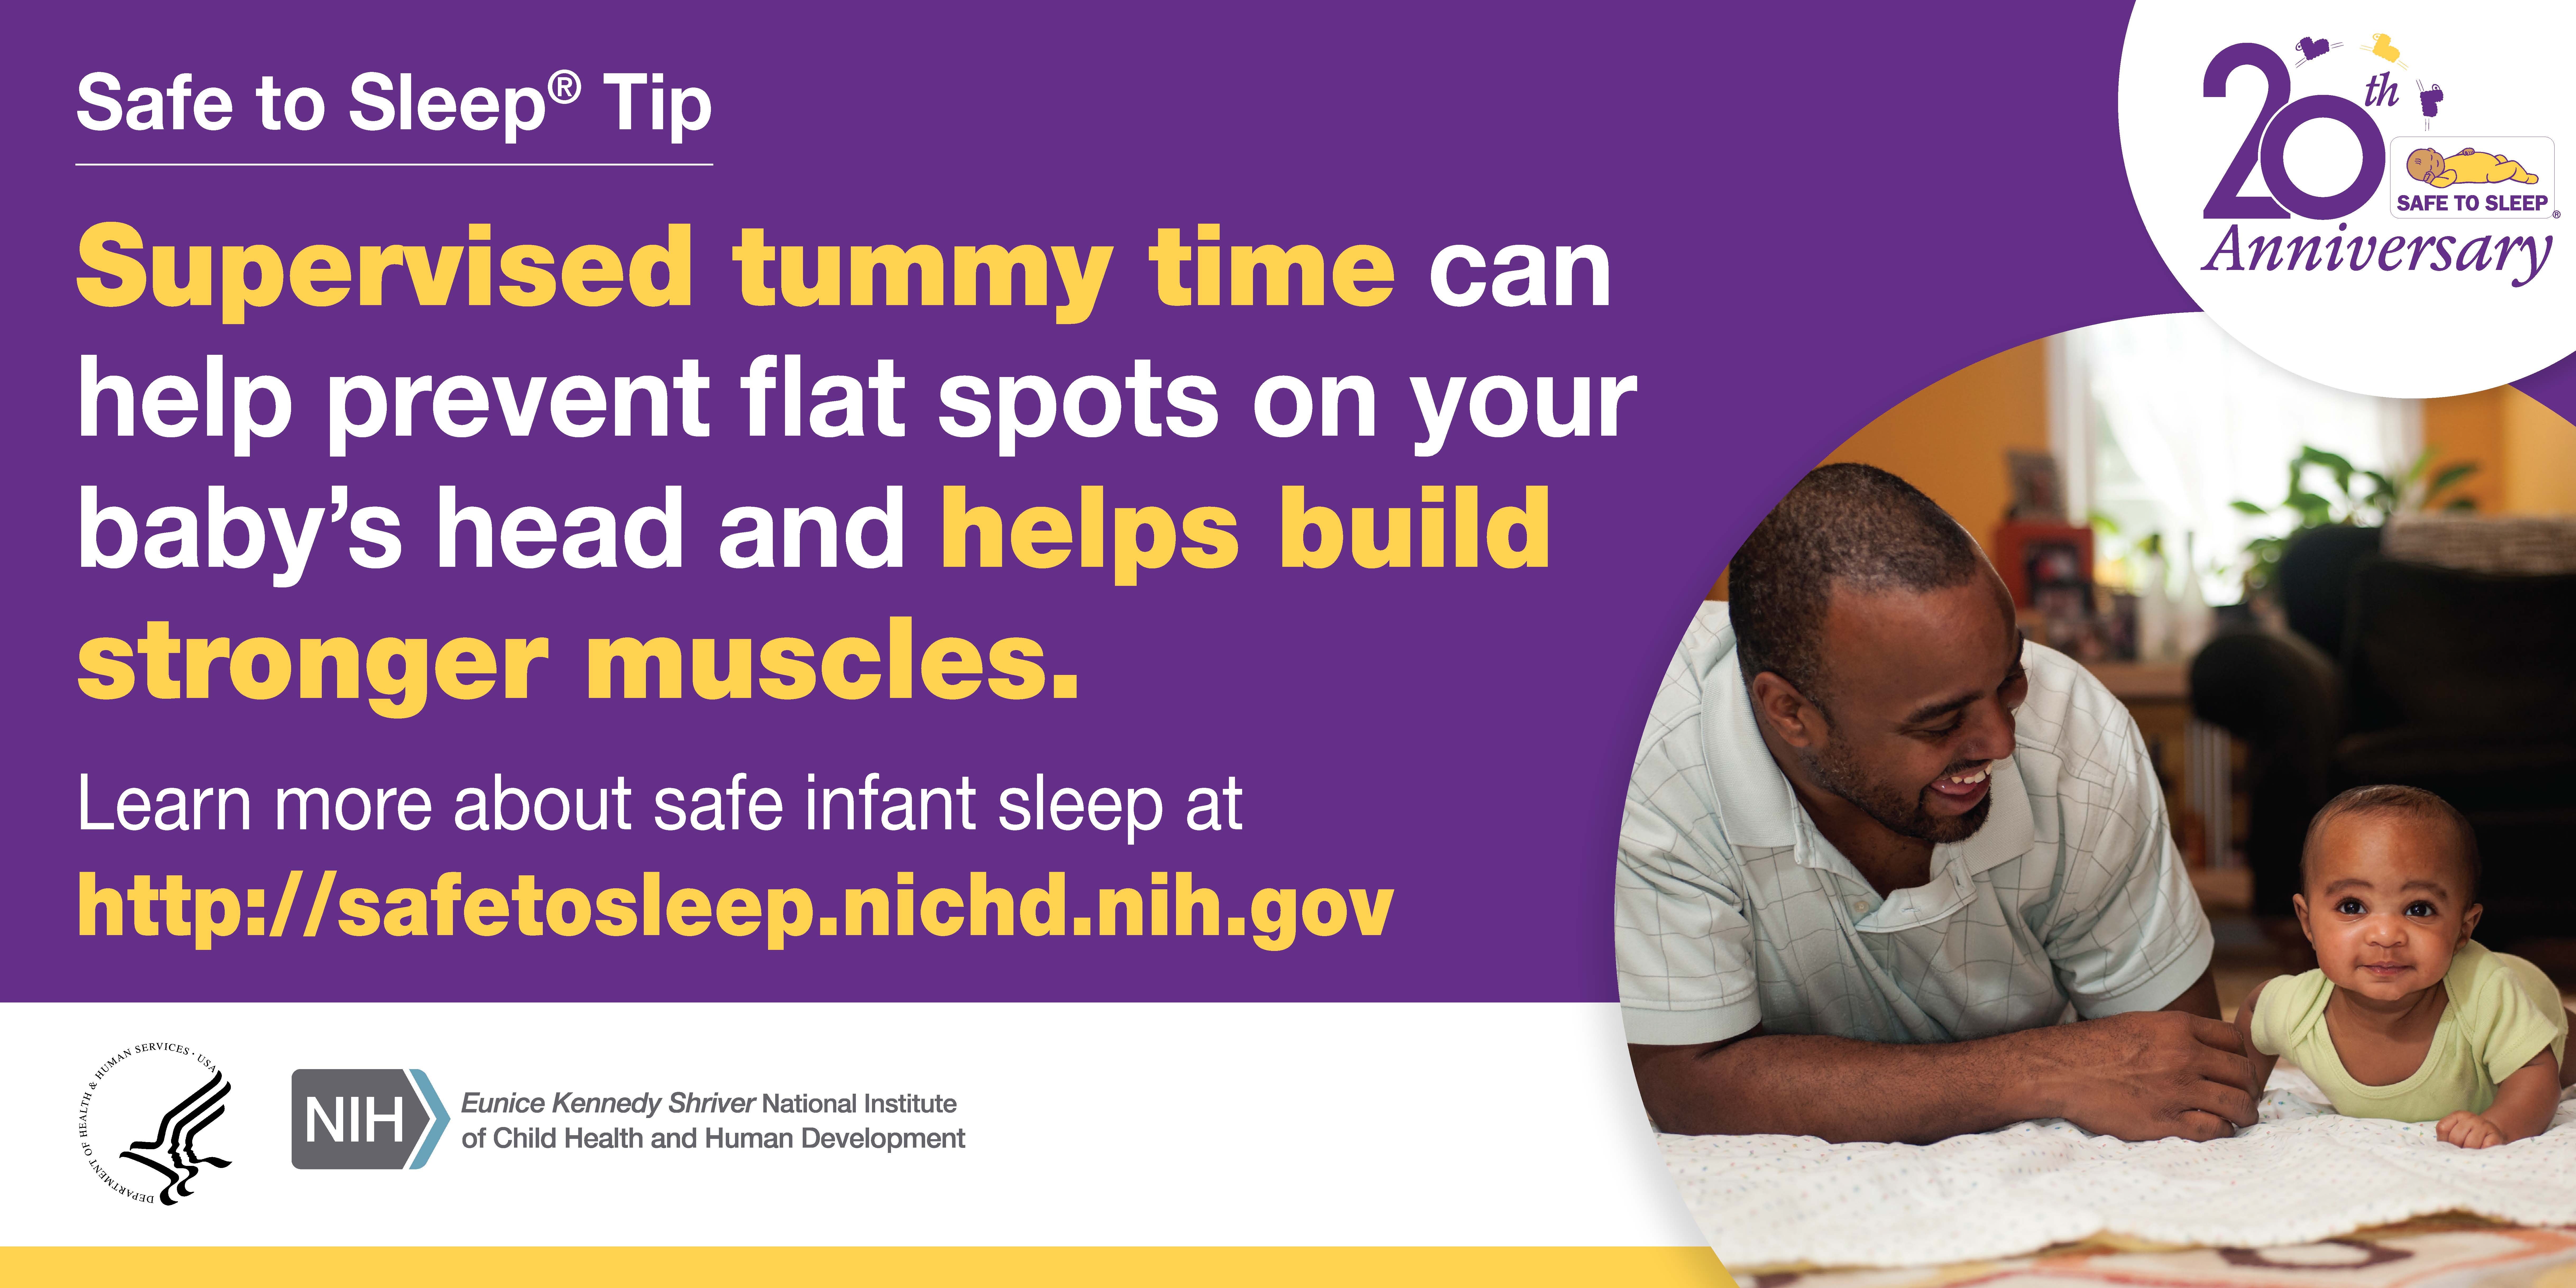 Supervised tummy time can help prevent flat spots on your baby's head and helps build strong muscles.